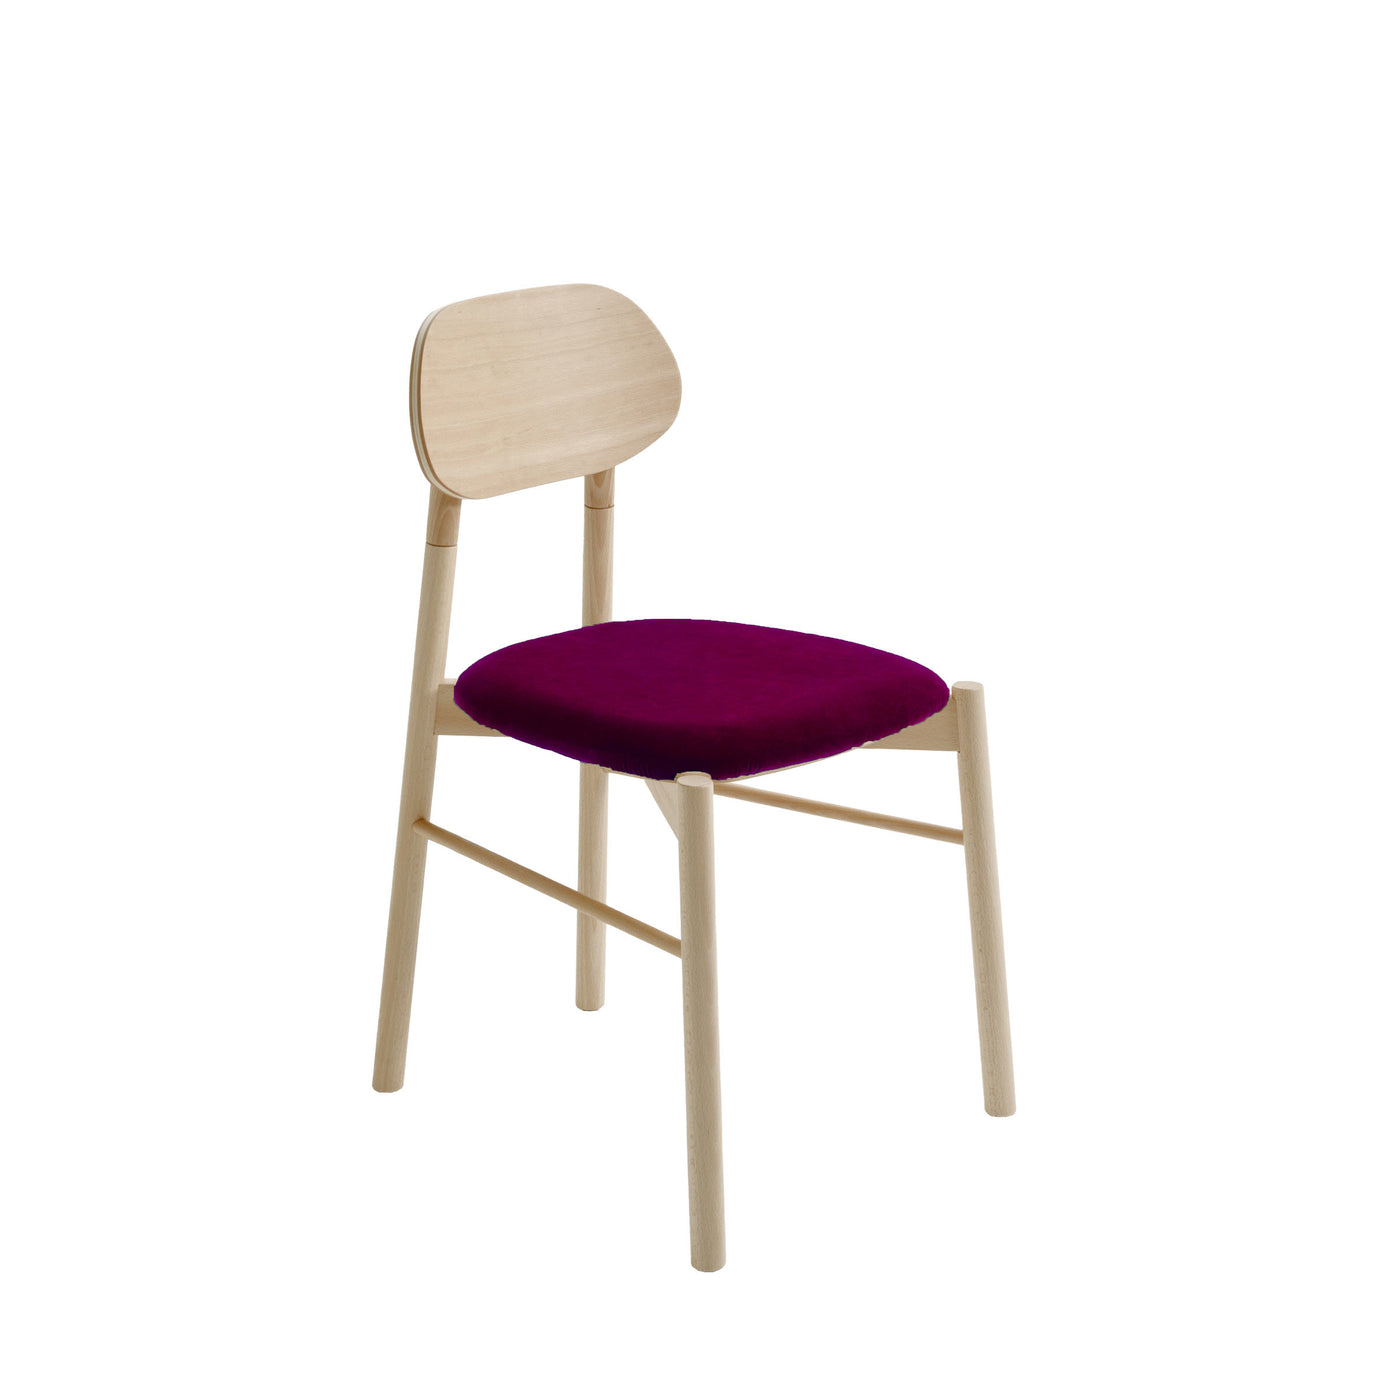 Upholstered Dining Chair BOKKEN by Bellavista + Piccini for Colé Italia 08